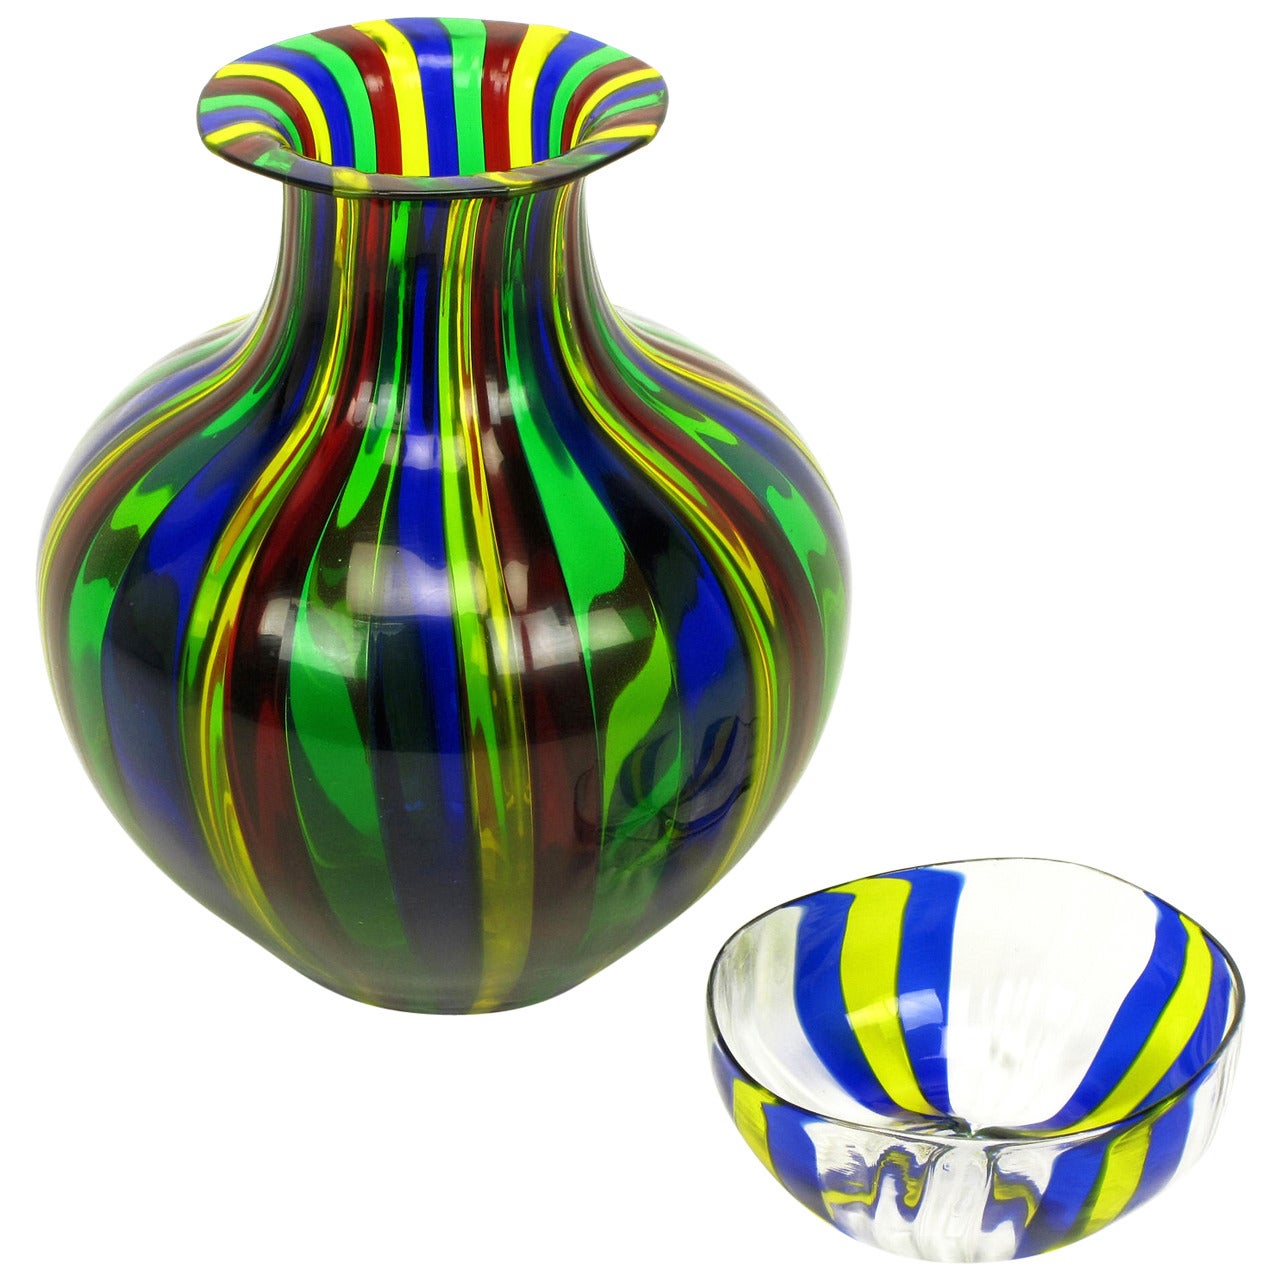 Italian Handblown Art Glass Vase with Bowl by Oggetti For Sale